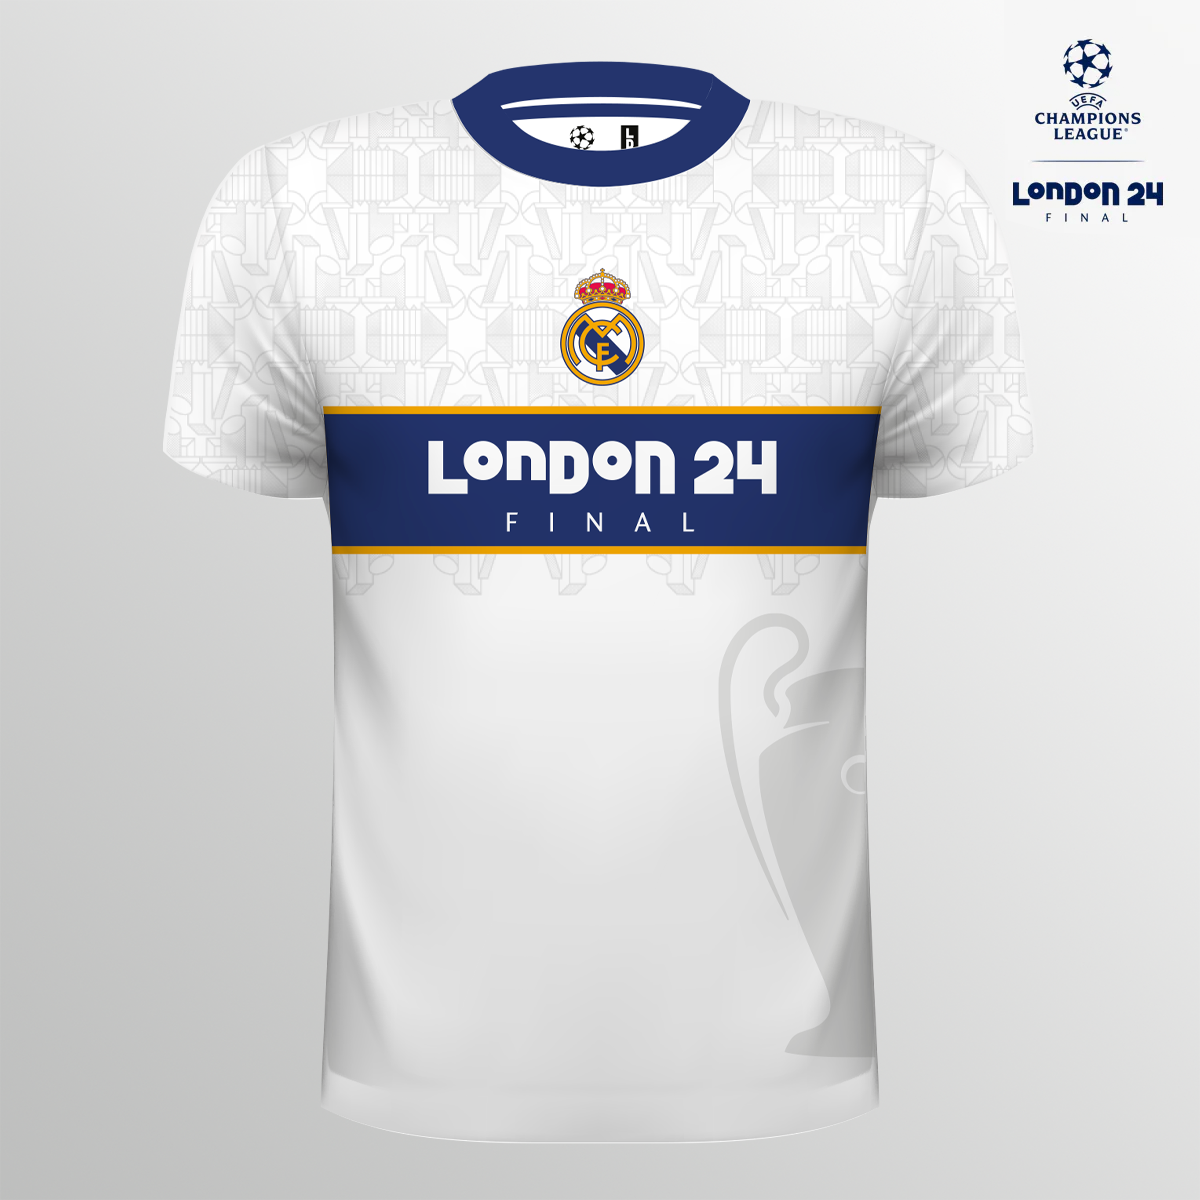 London 24 UCL Final Real Madrid Sublimated Replica T-shirt